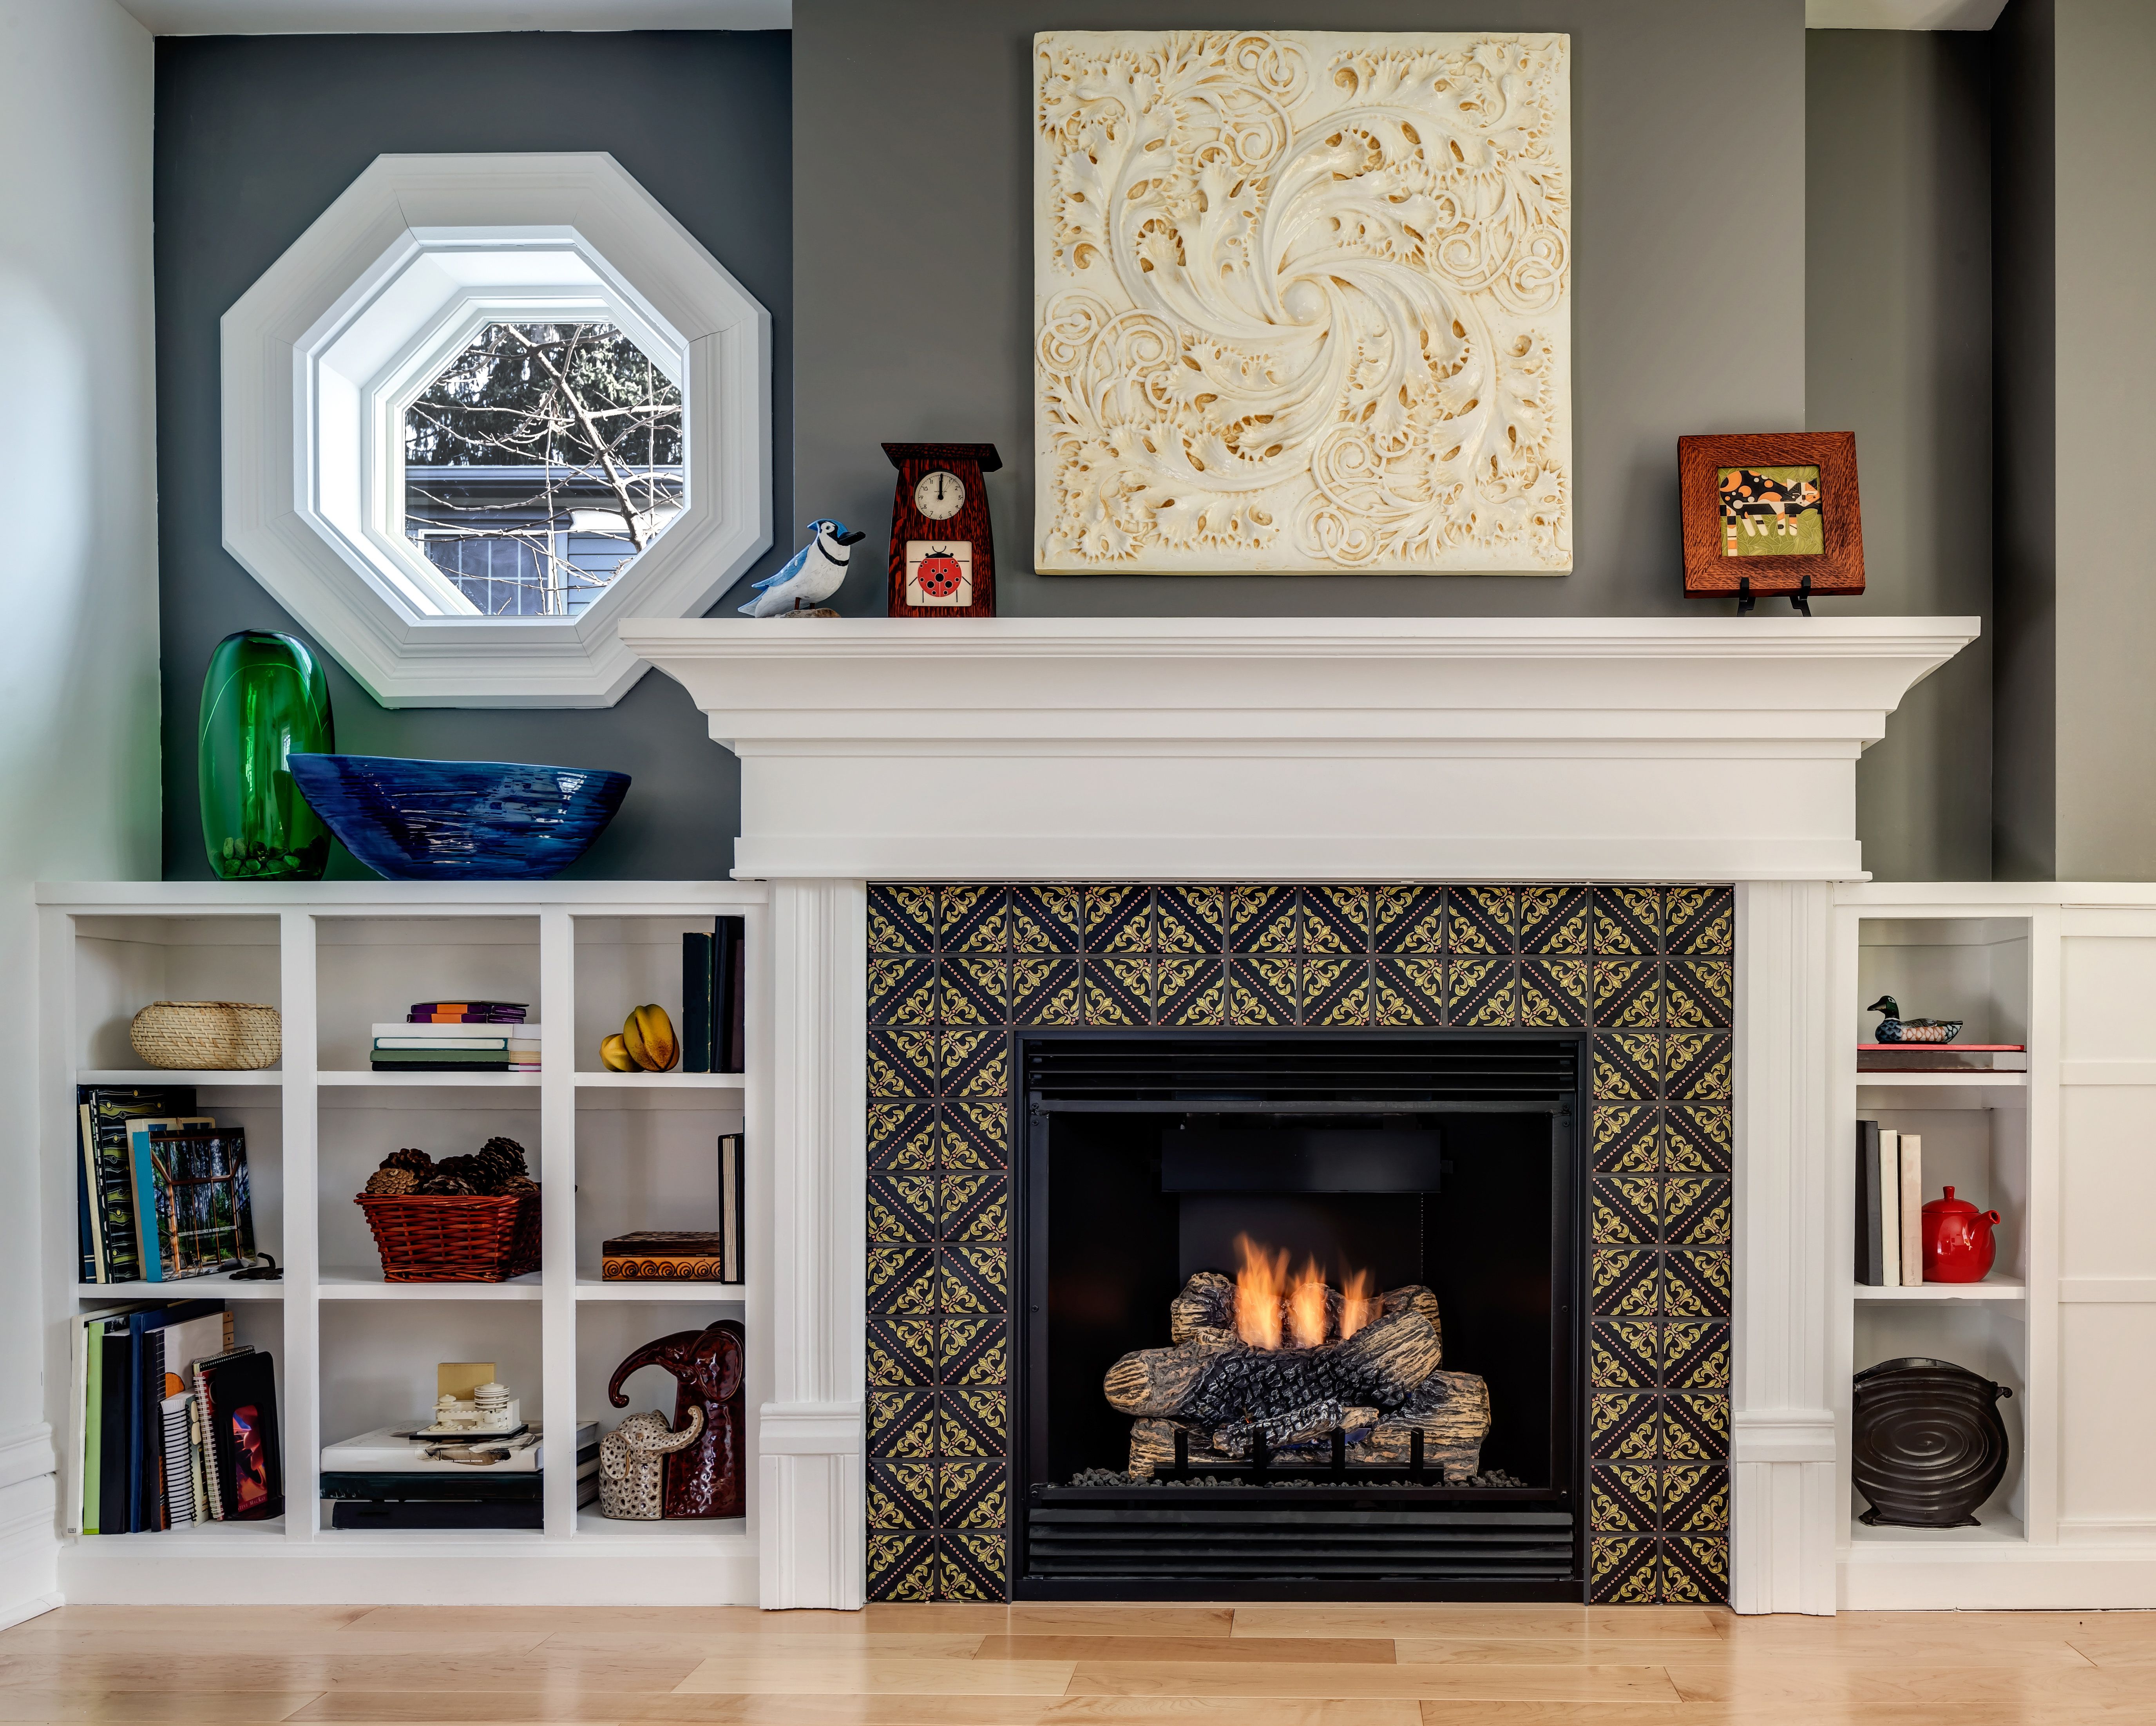 How to Work A Fireplace Awesome This Small but Stylish Fireplace Features Our Lisbon Tile